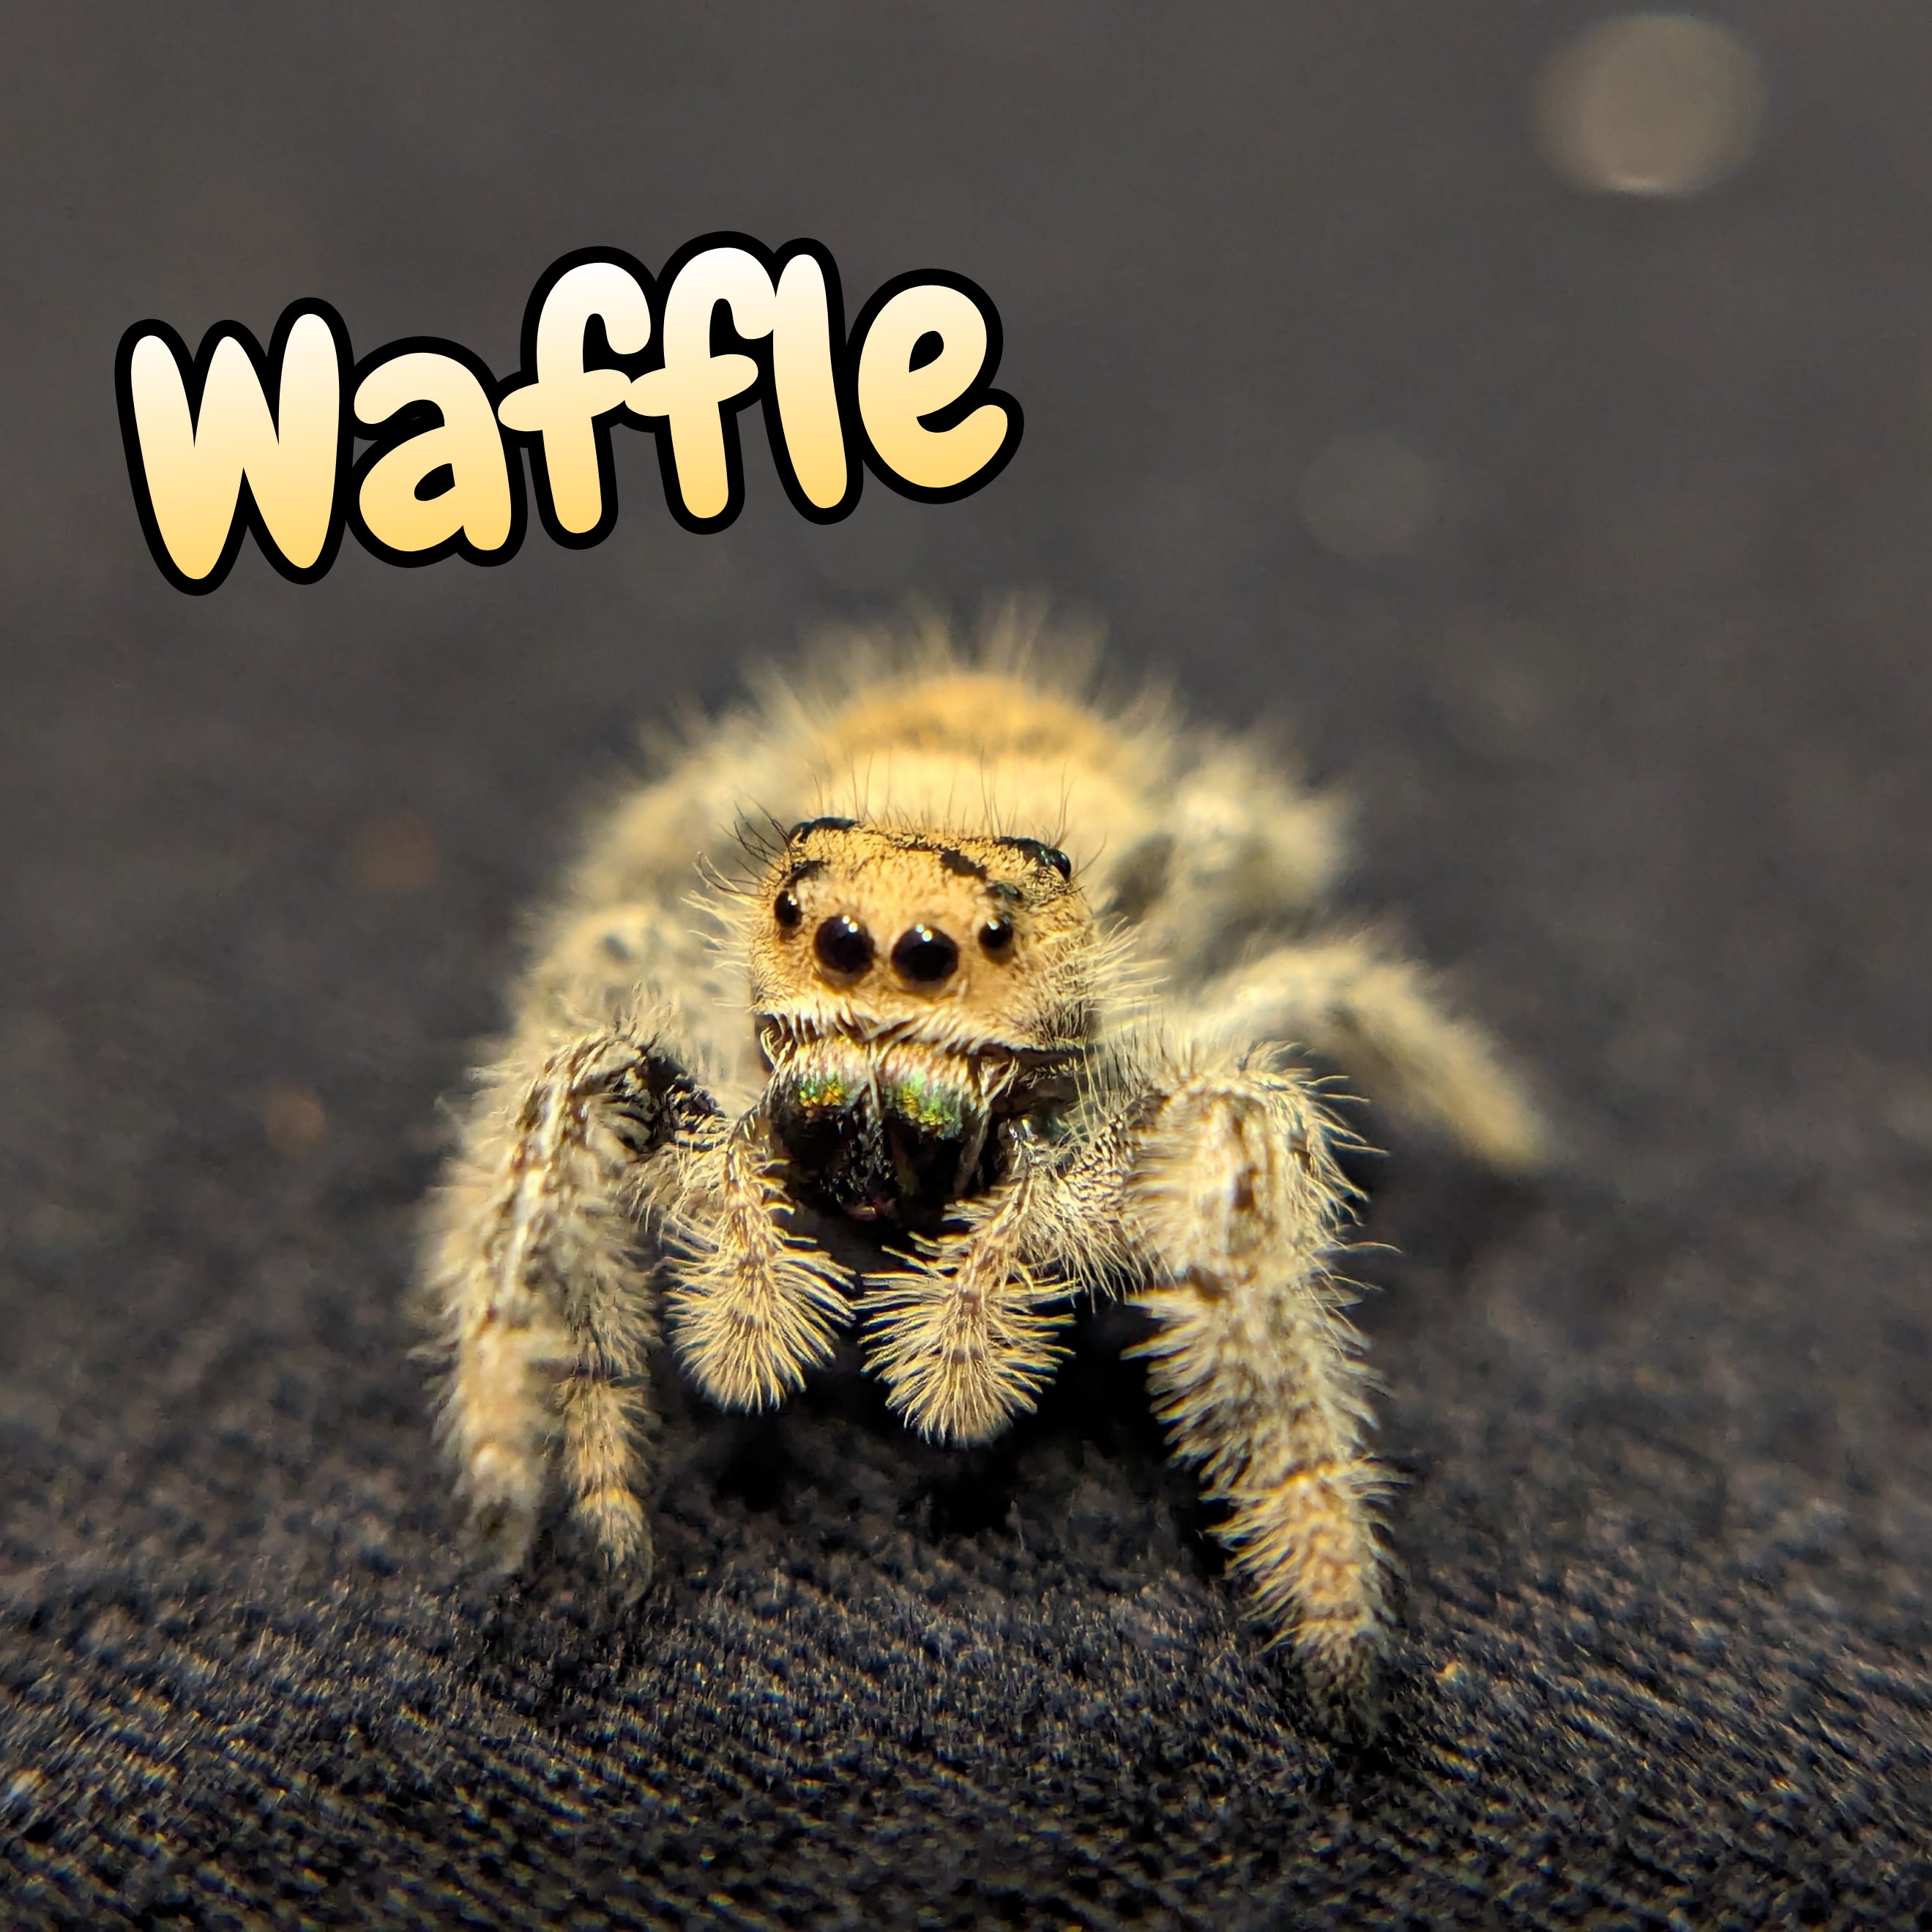 Regal Jumping Spider "Waffle"